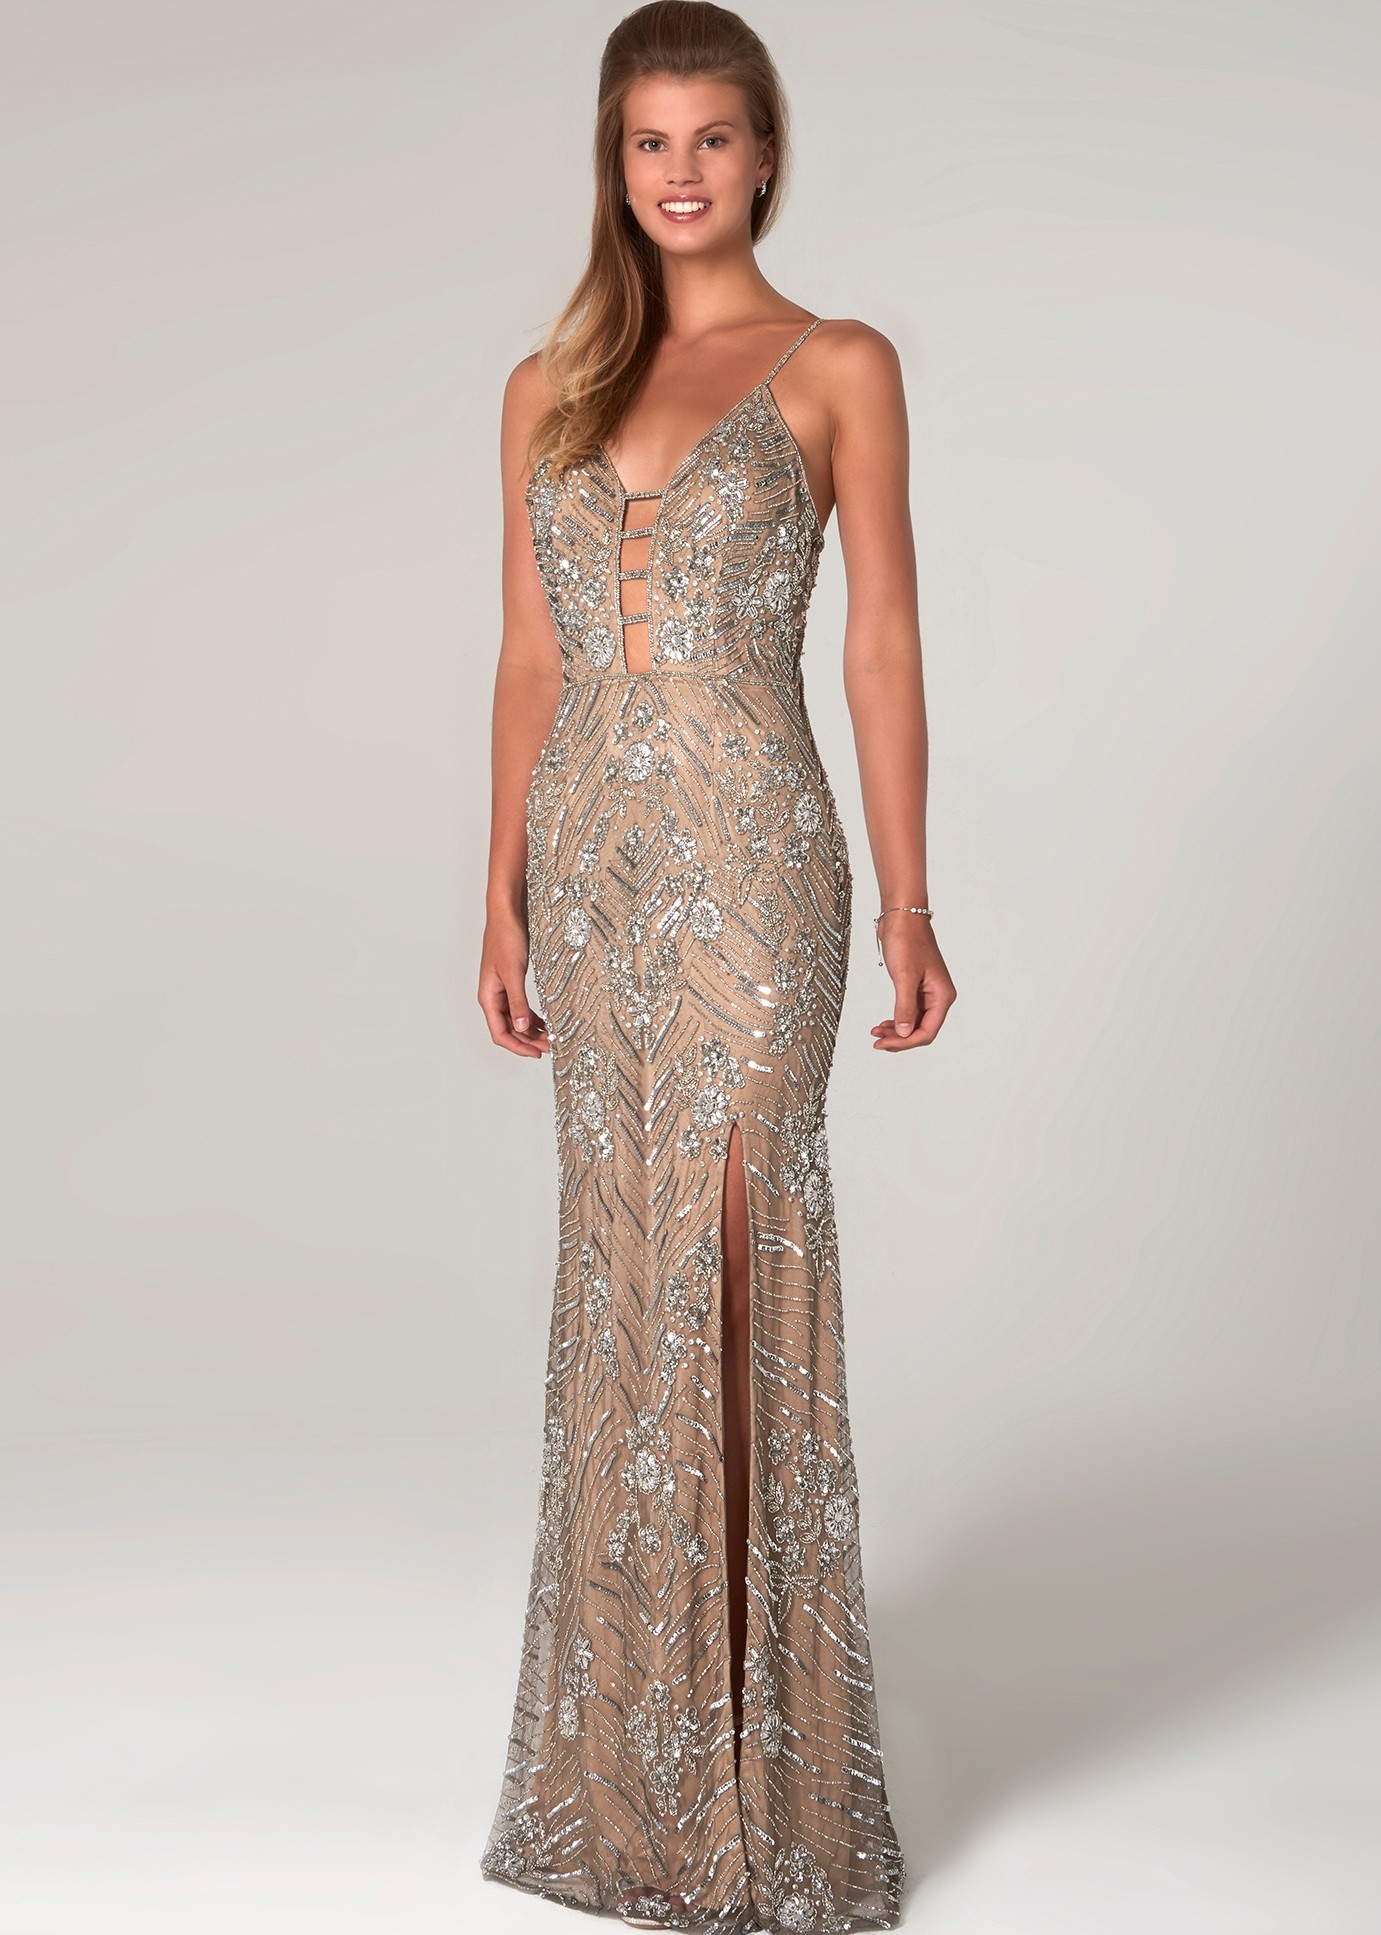 Scala 60101 Sequin Evening Gown